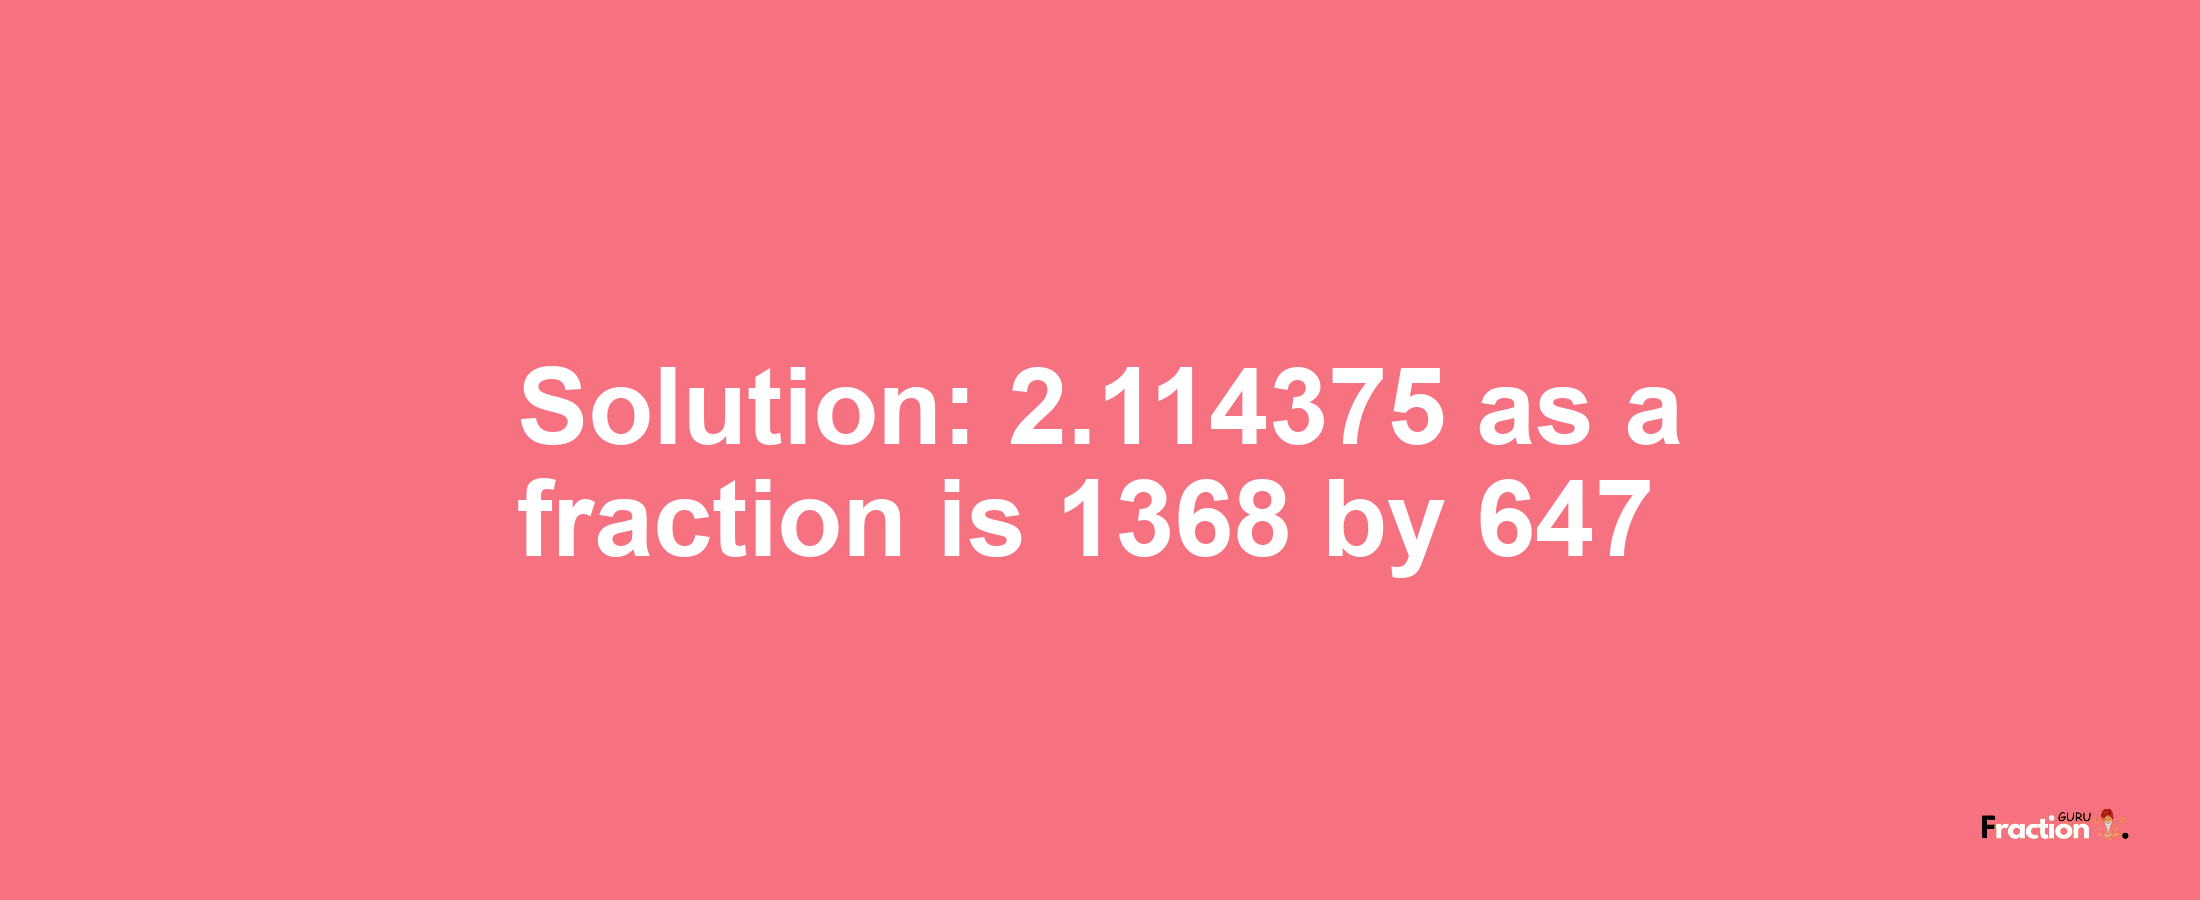 Solution:2.114375 as a fraction is 1368/647